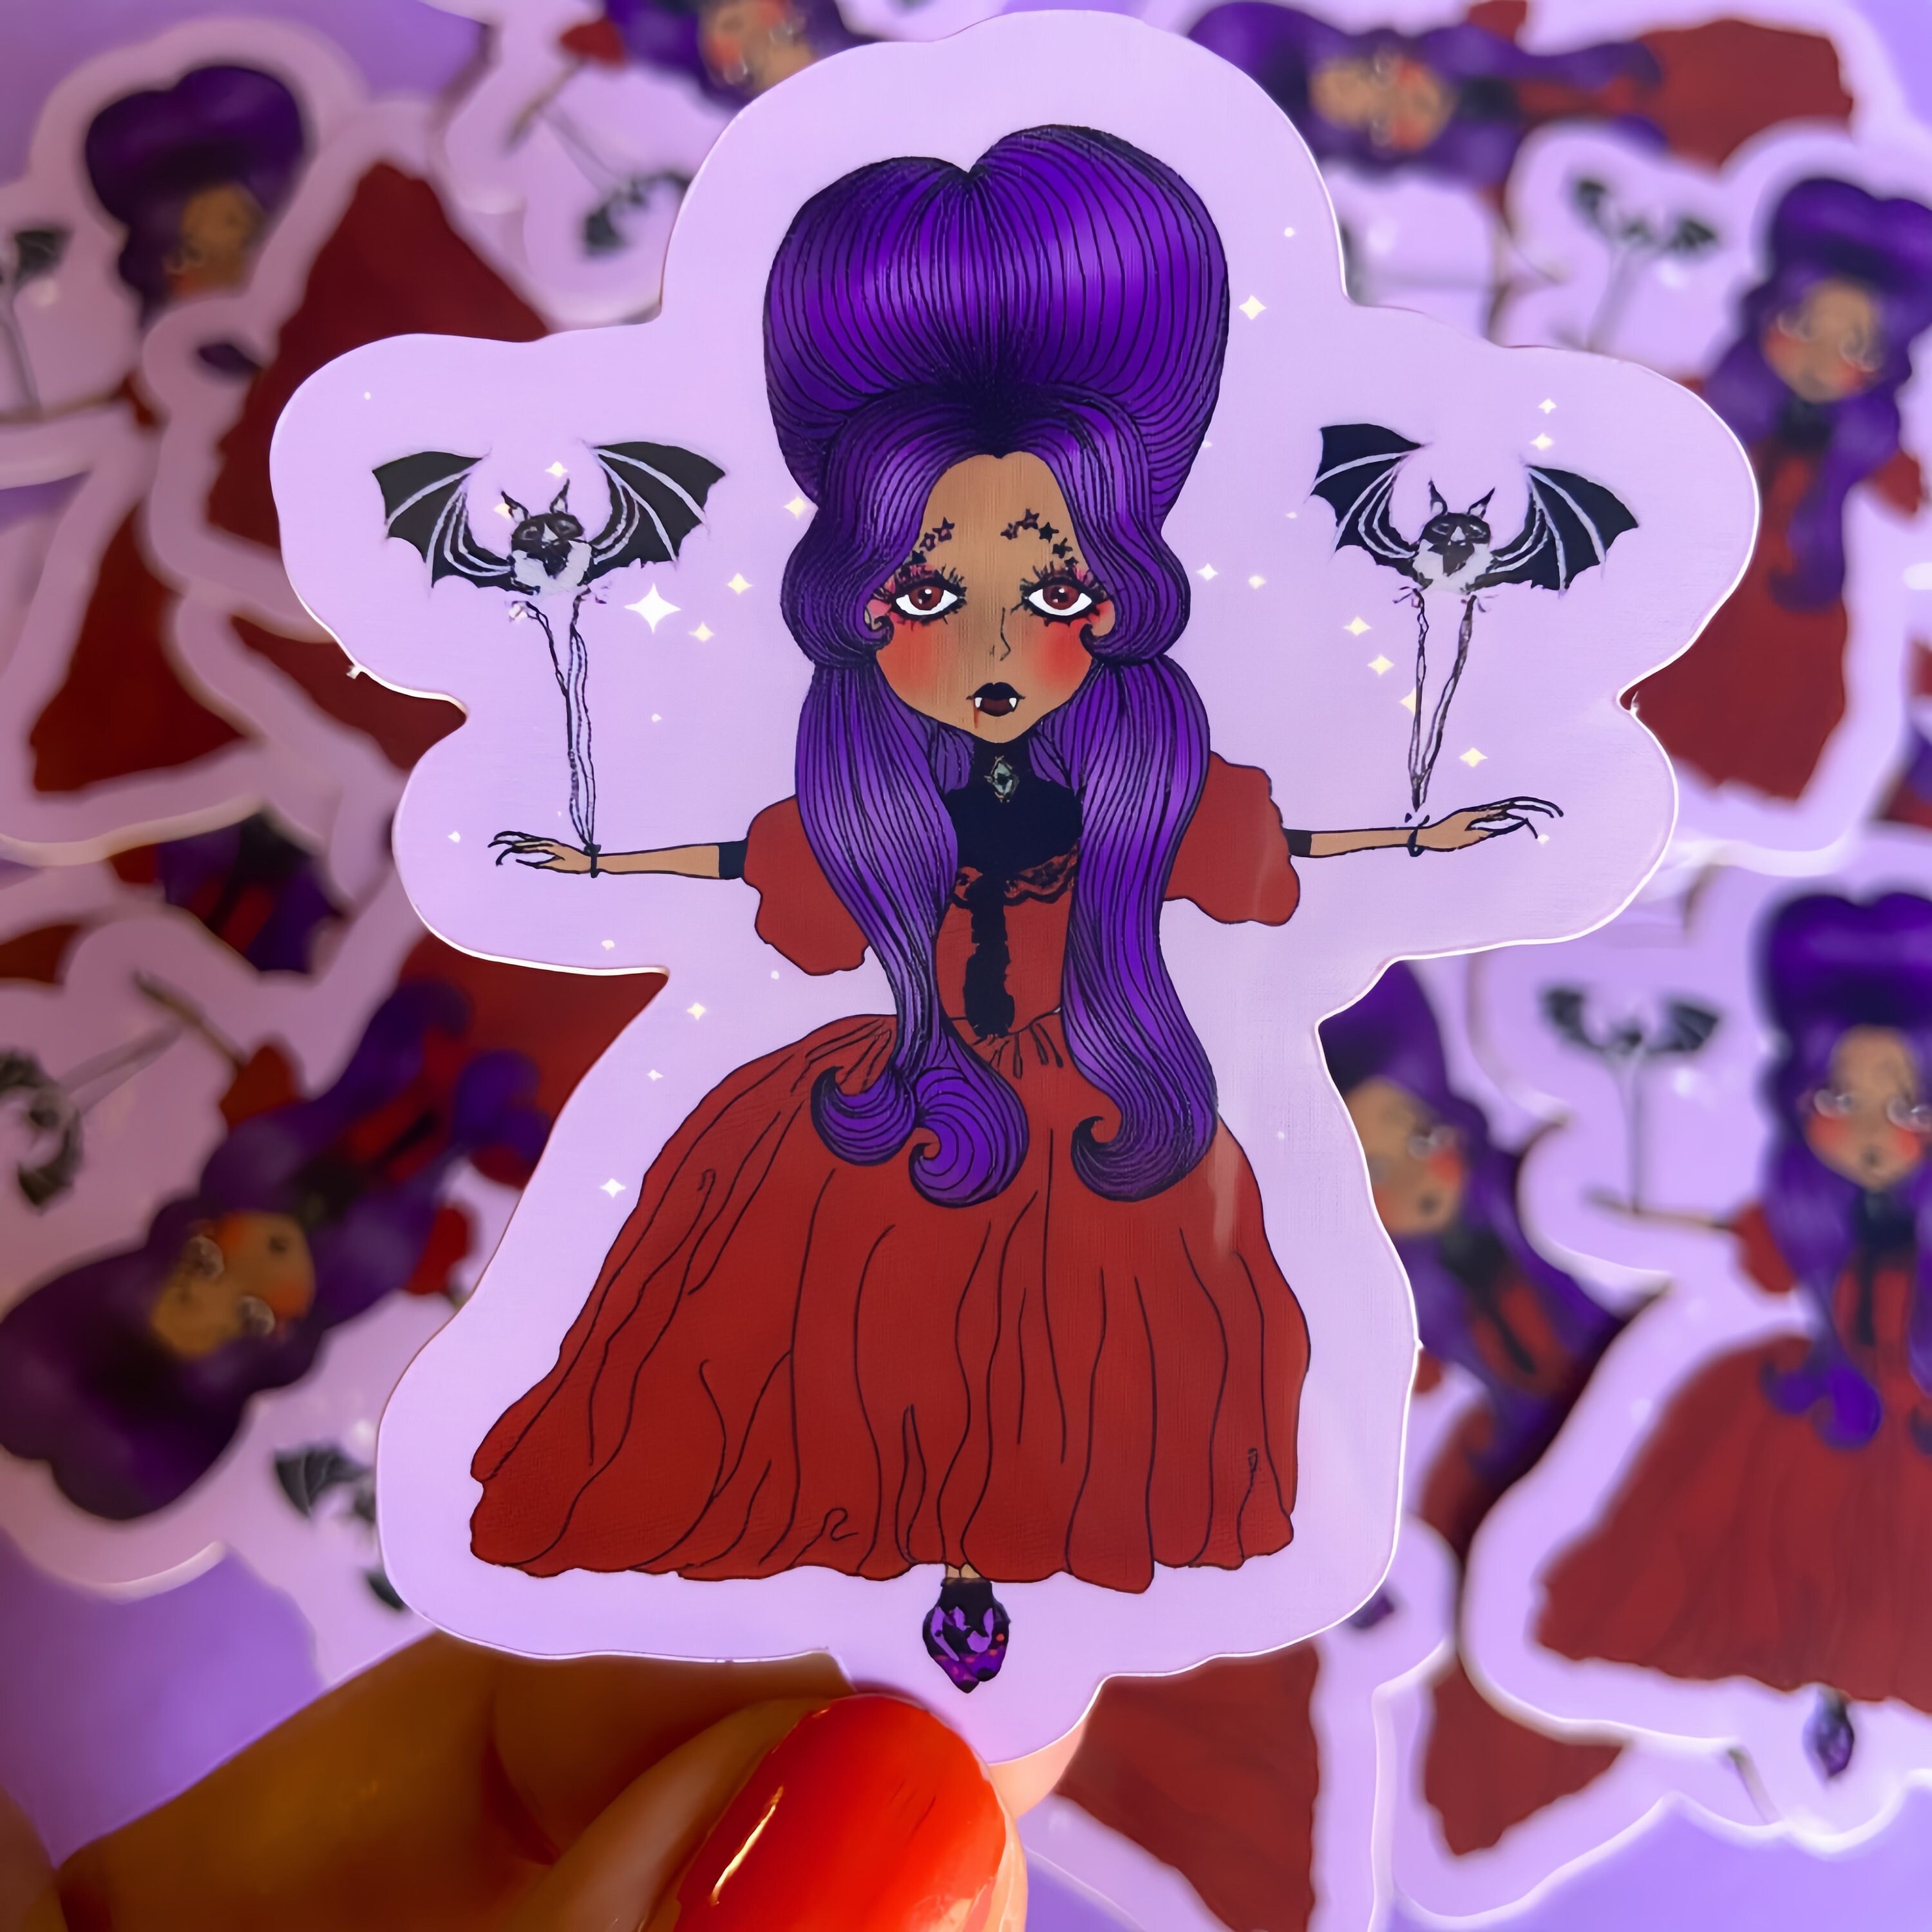 Set of 12 Creepy Girl Emo Goth Stickers 2 on Their Longest Side